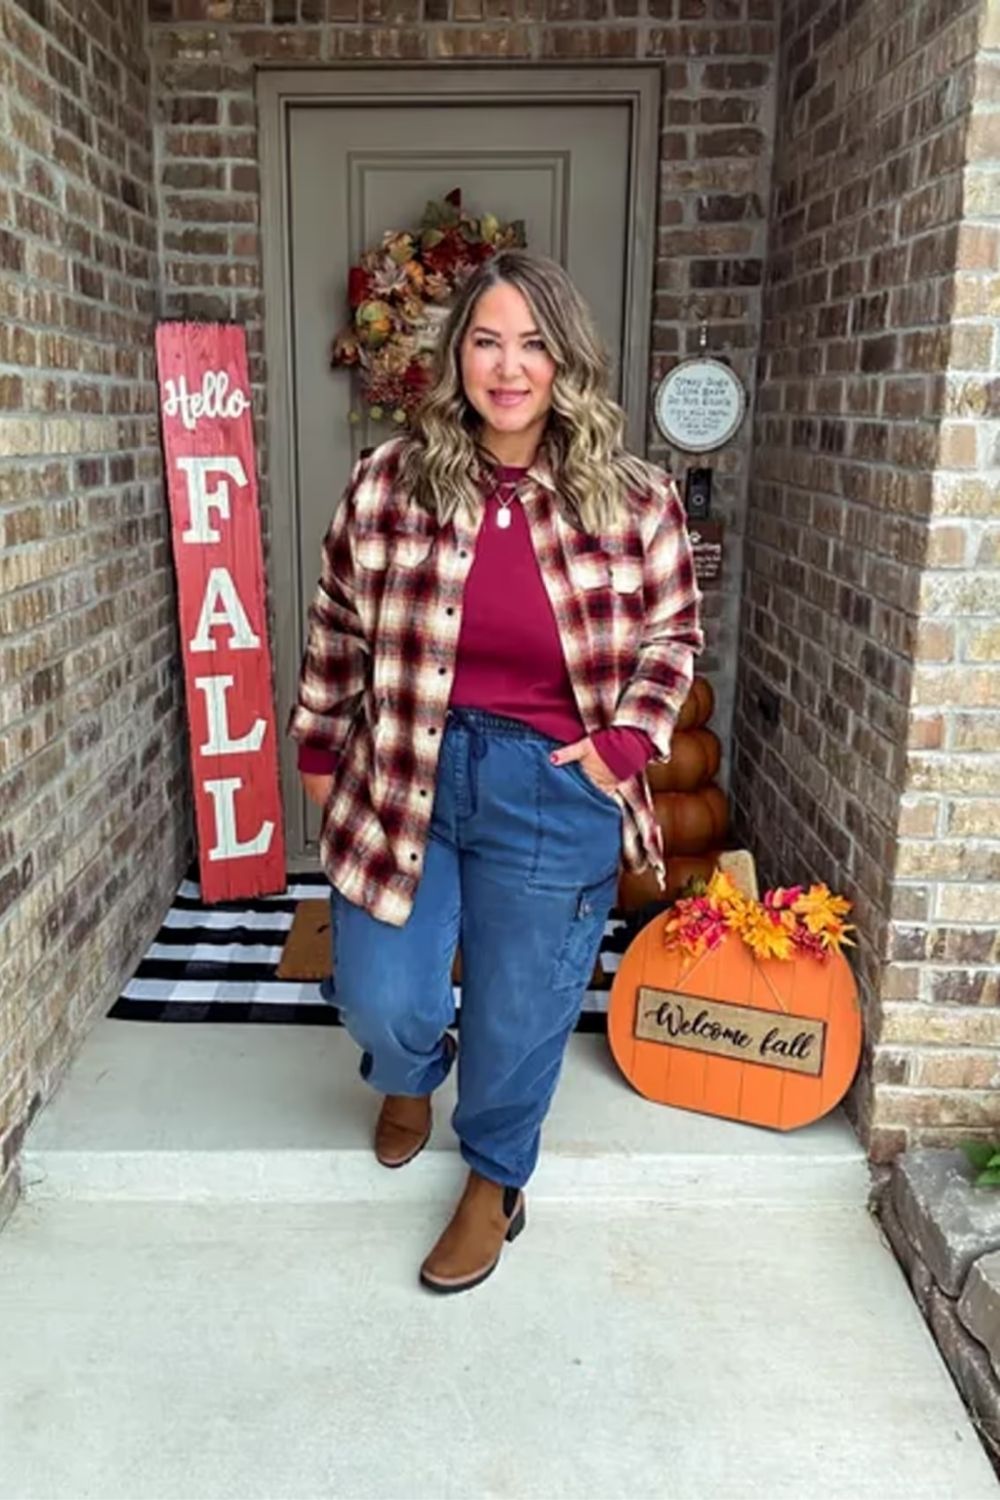 Embracing a cozy, autumnal vibe, this outfit combines a warm plaid jacket with a rich burgundy top, cuffed jeans, and ankle boots for a casual yet stylish look perfect for a fall day.